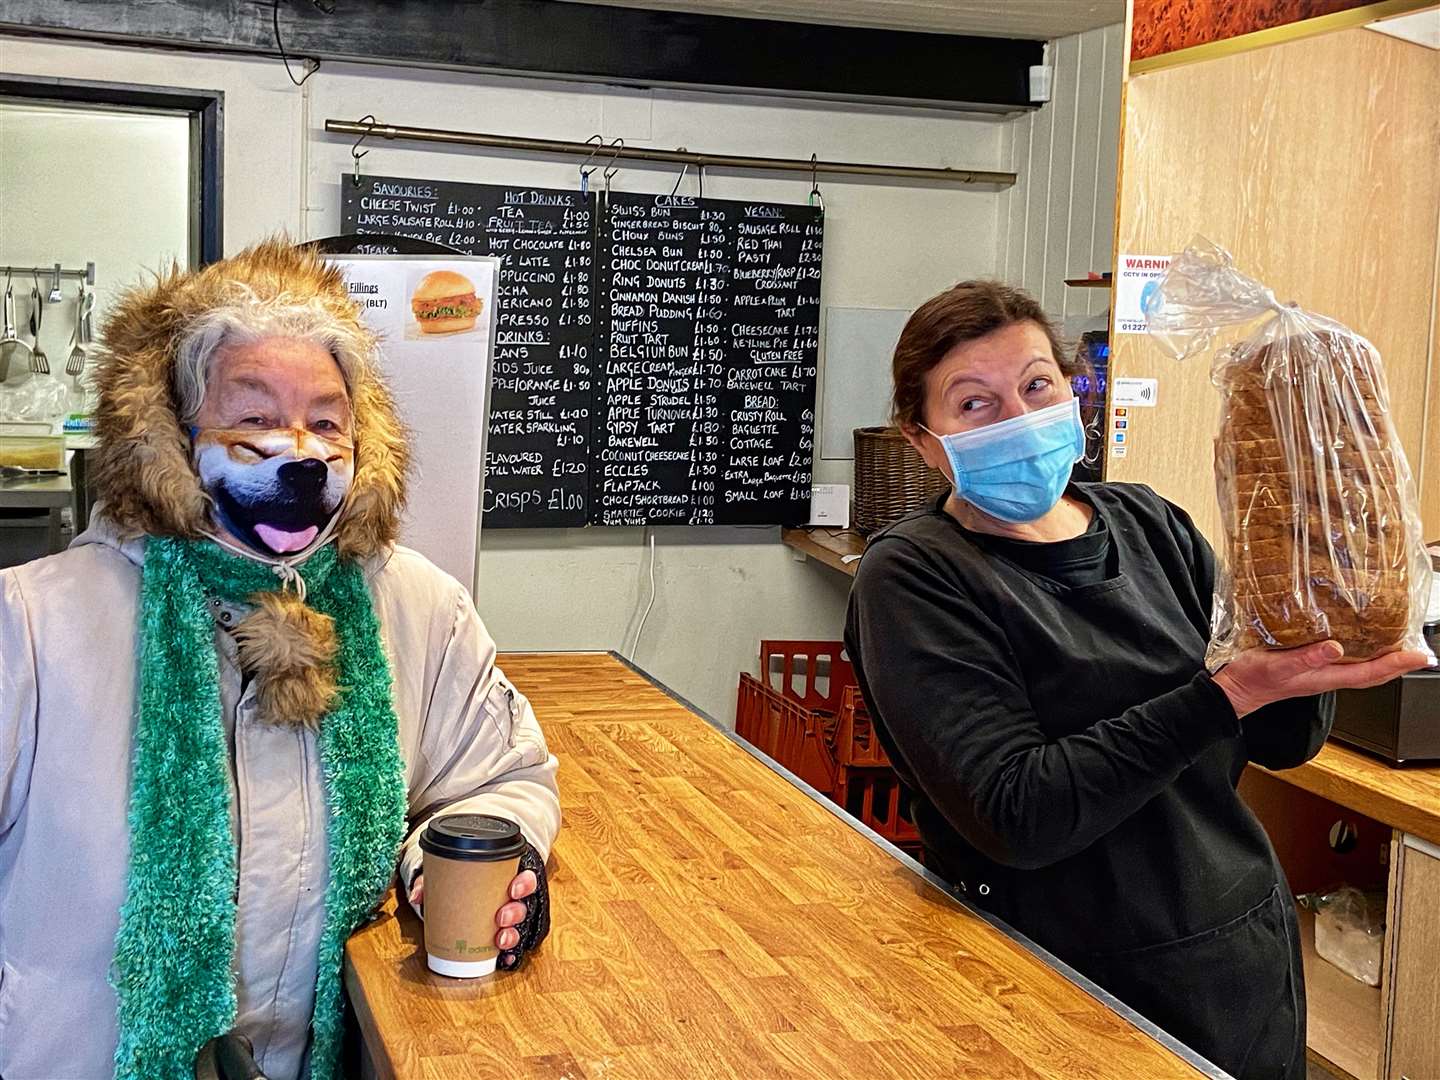 Colin Alderman snapped these mask-wearers at Crust bakers in East Street, which remained open throughout the pandemic. He said: "Masks may be compulsory but they don’t have to be dull!"